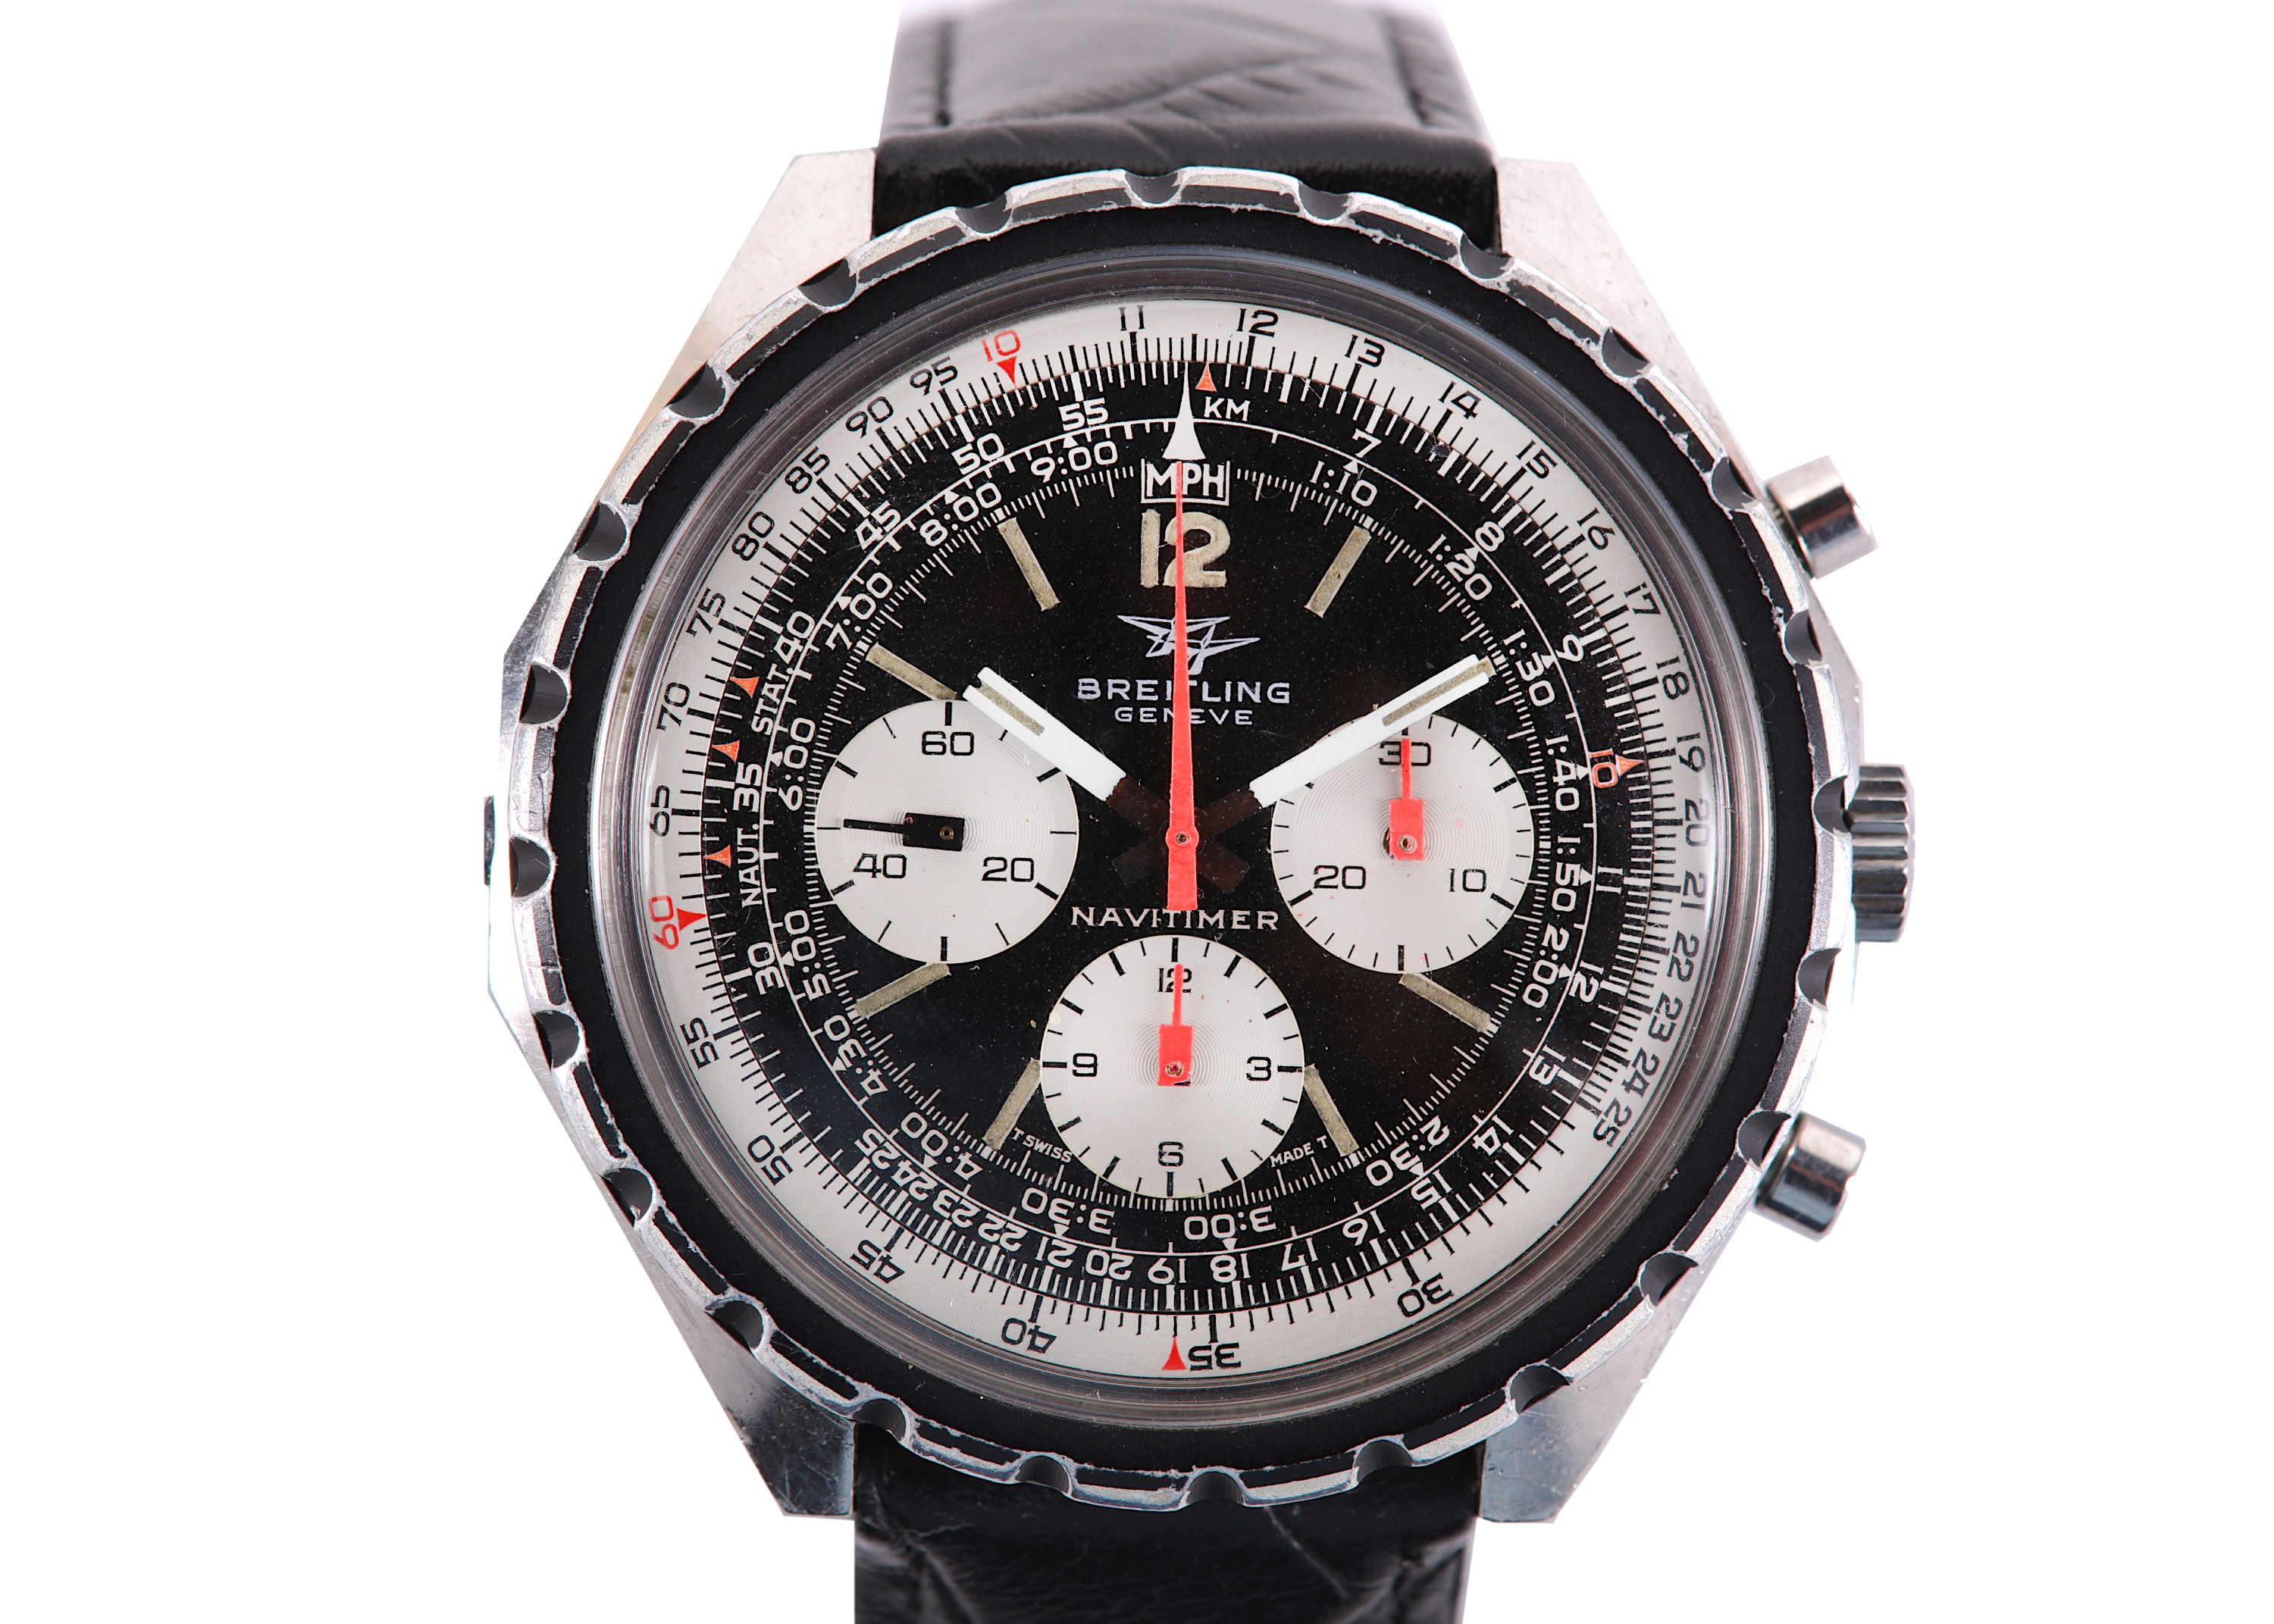 BREITLING. A OVERSIZED STAINLESS STEEL MANUAL WIND CHRONOGRAPH WRISTWATCH. Date: Circa 1967. - Image 6 of 6